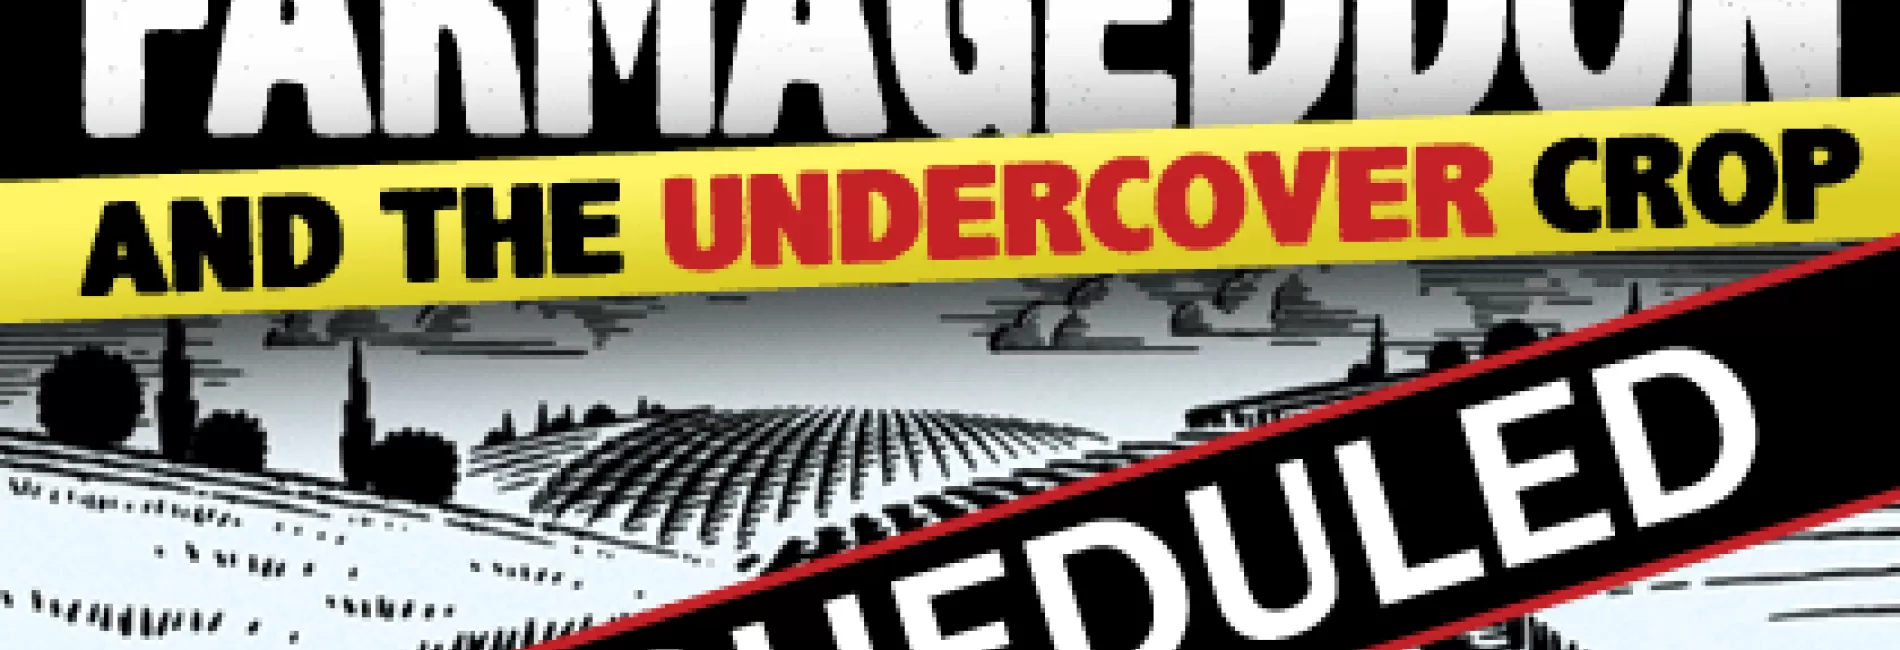 Farmageddon and the Undercover Crop, Rescheduled to June 13 and 14